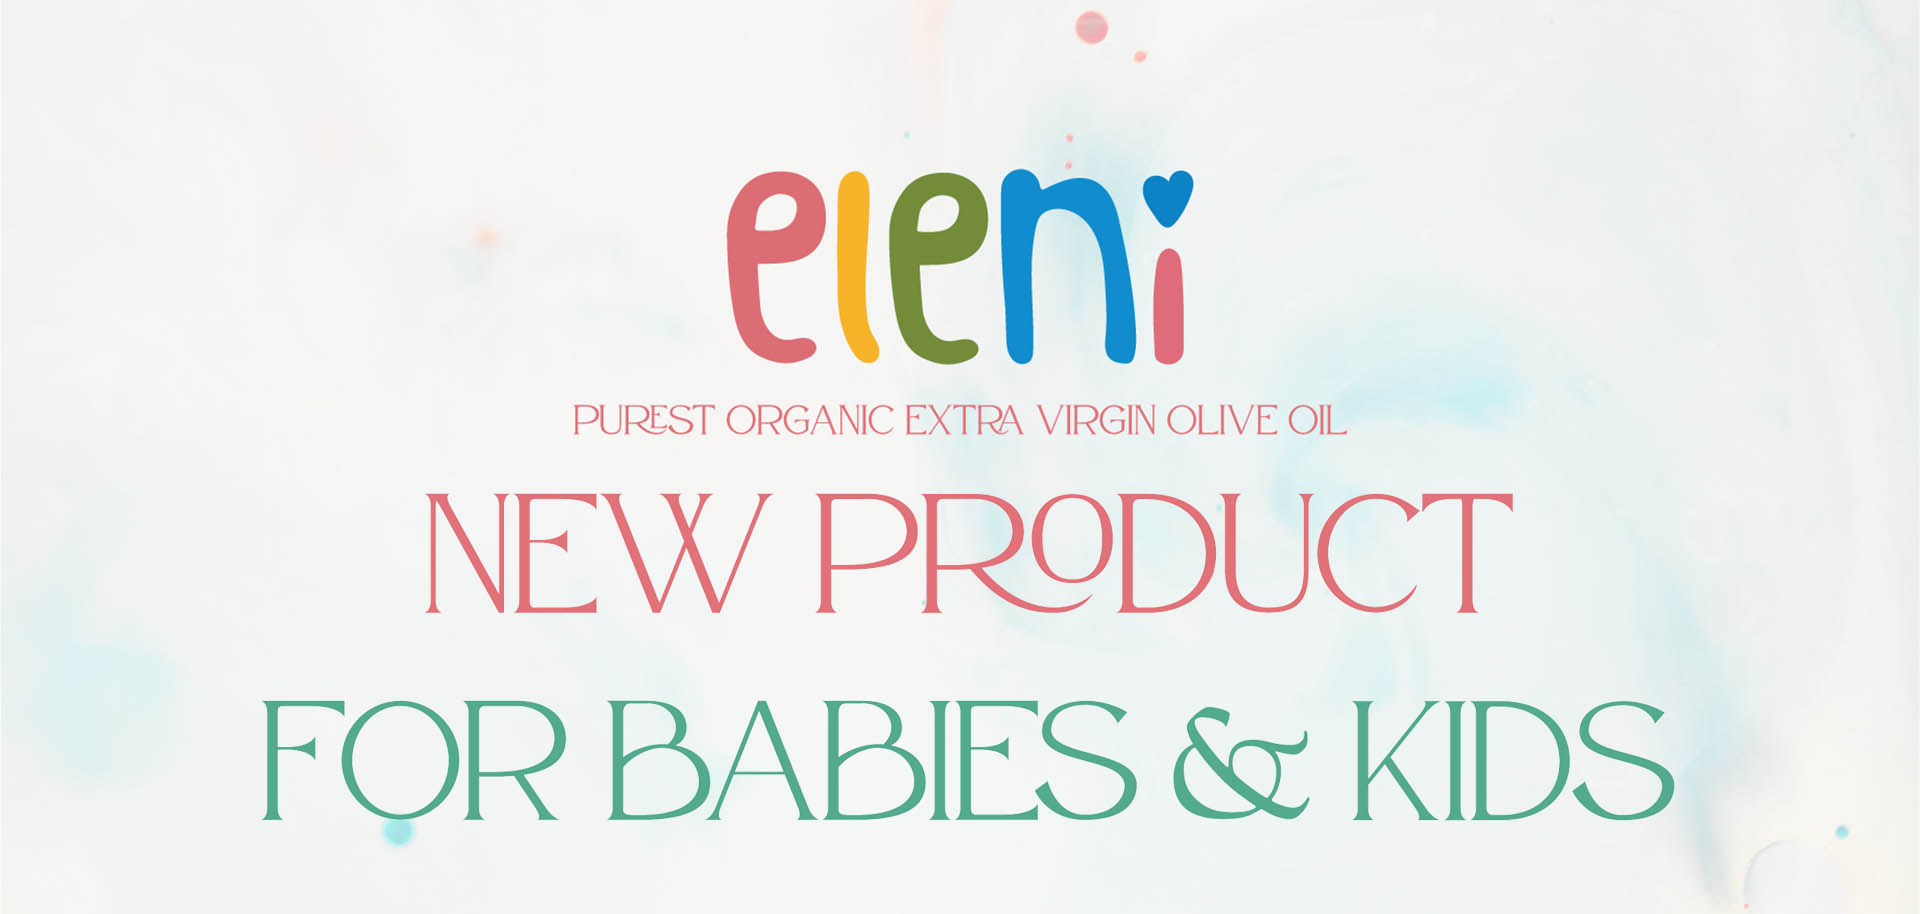 Greek organic extra virgin olive oil for babies and kids from Crete